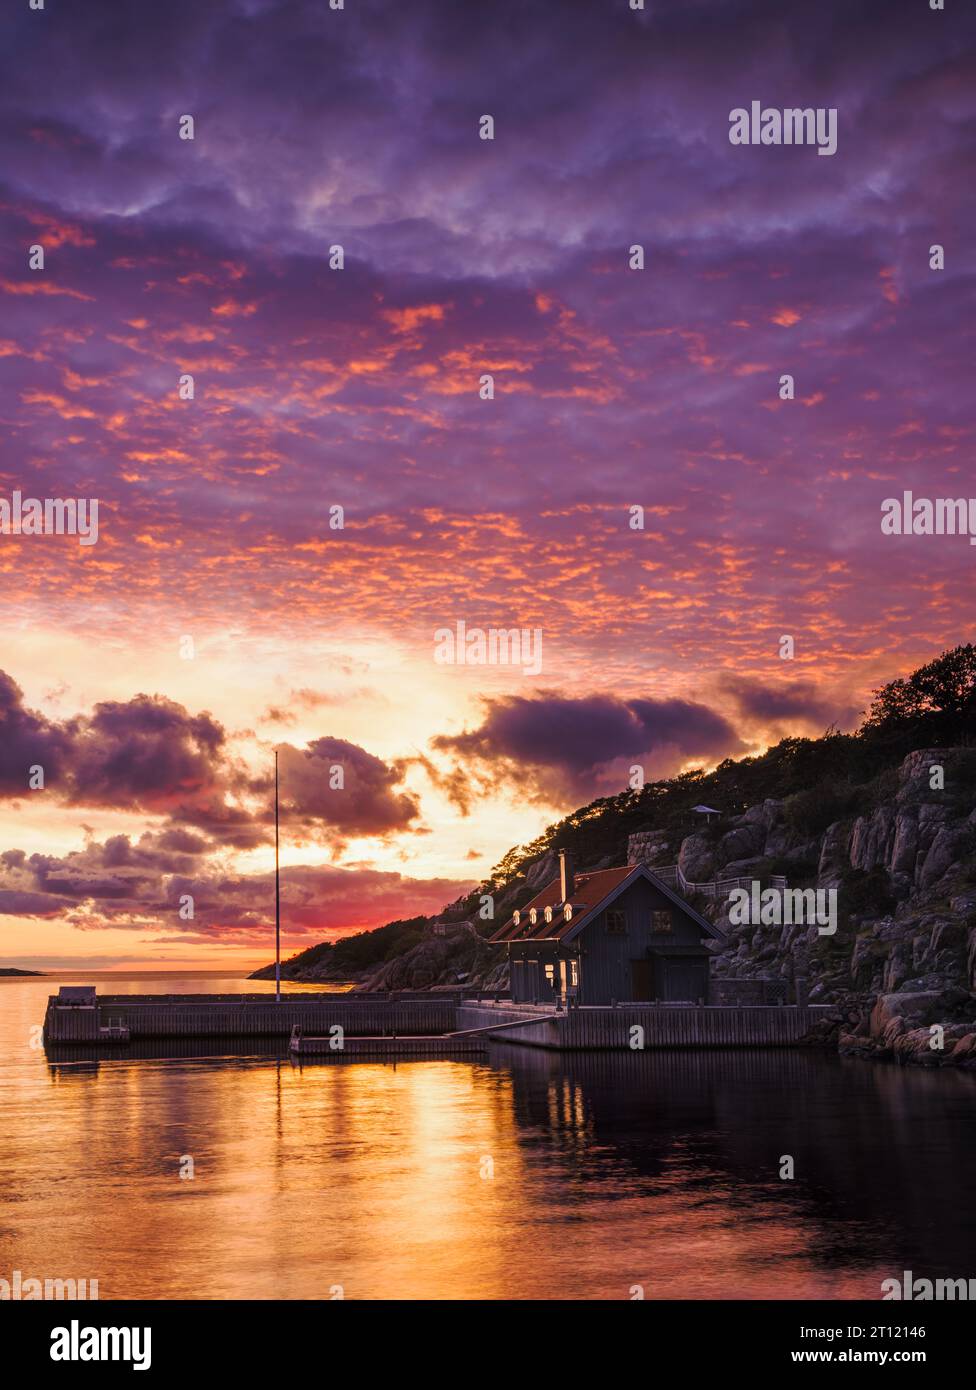 A tranquil waterfront house at vibrant sunset in Sweden. Stock Photo